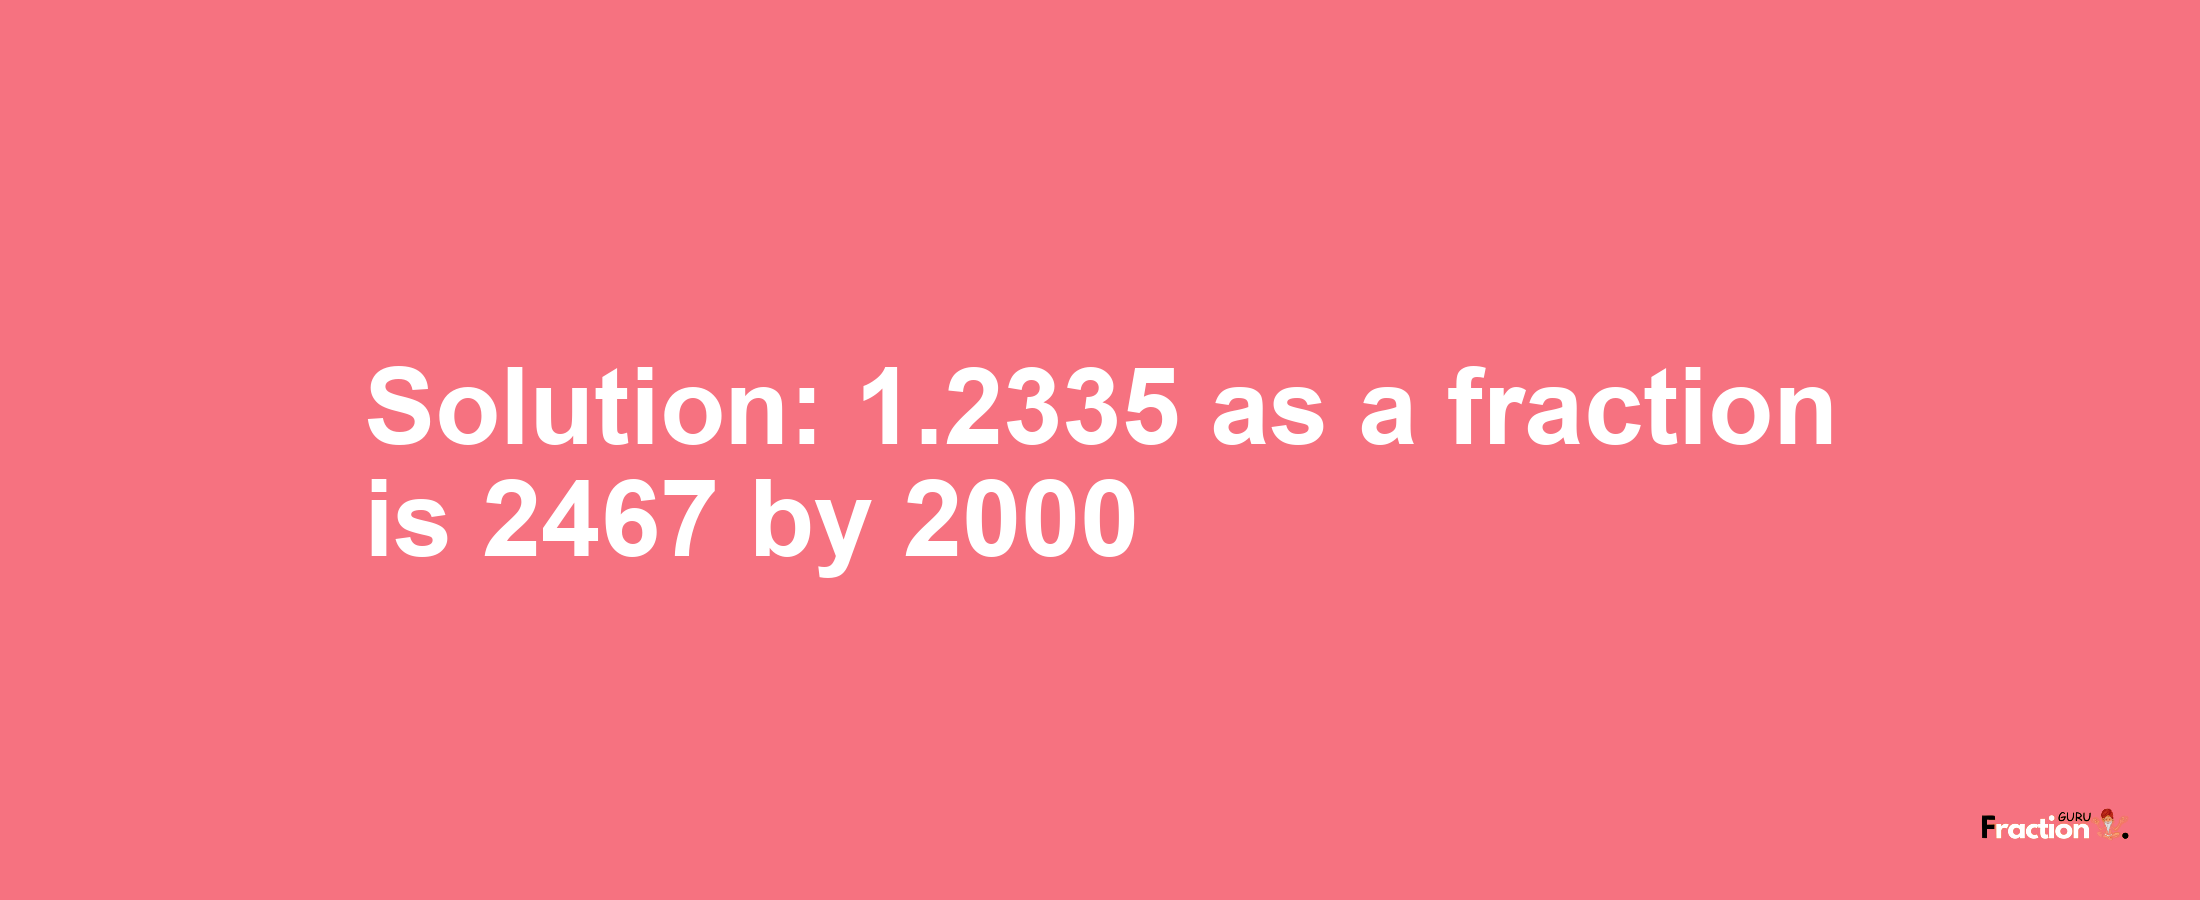 Solution:1.2335 as a fraction is 2467/2000